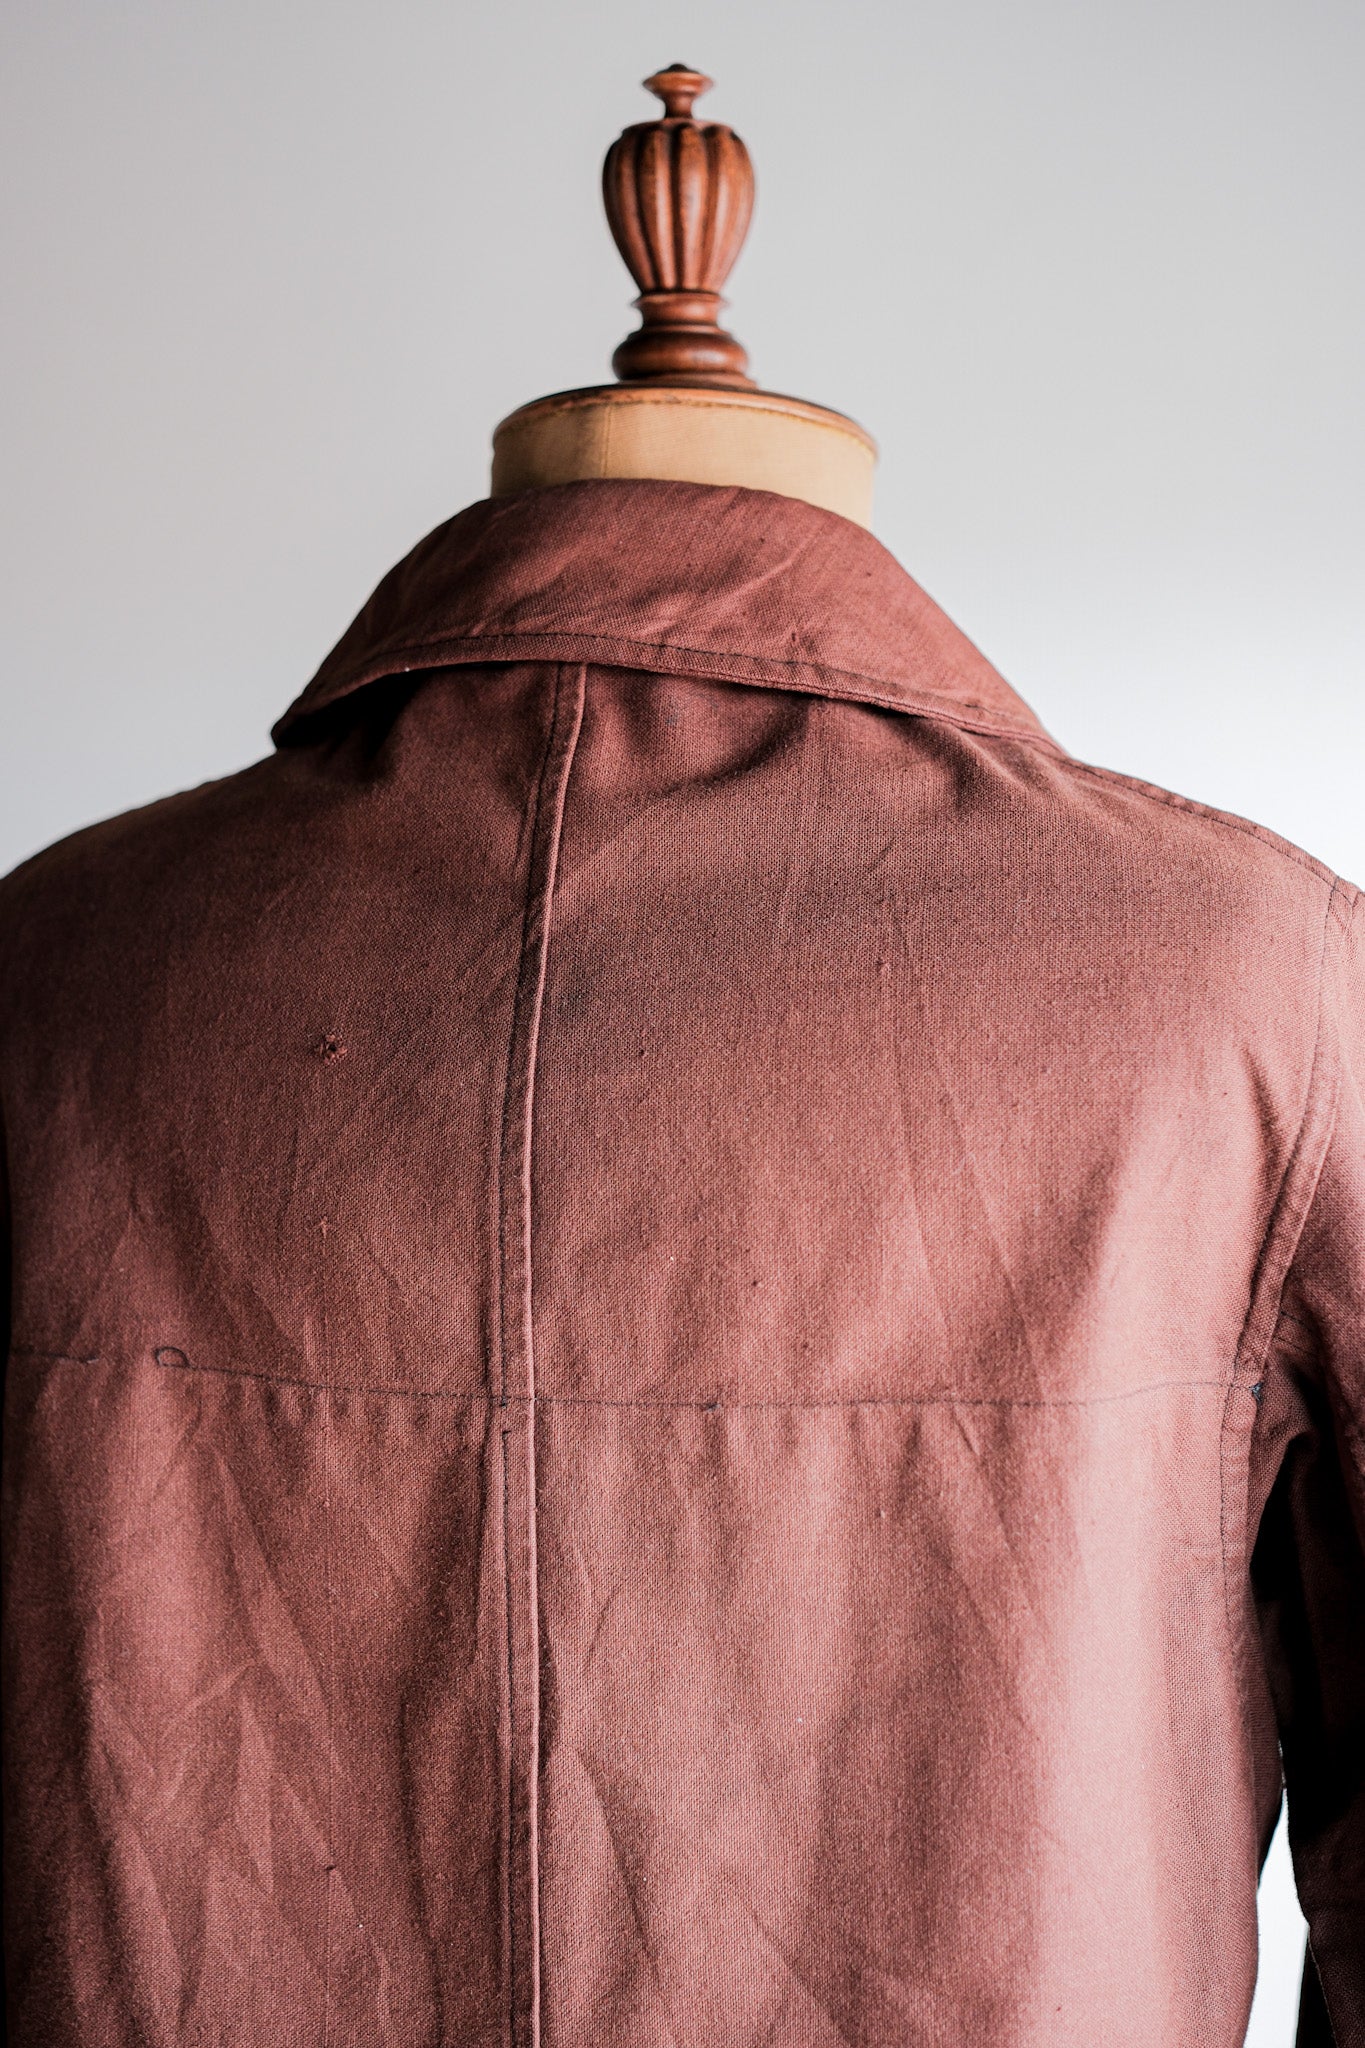 【~20's】French Vintage Reddish Brown Cotton Linen Hunting Jacket